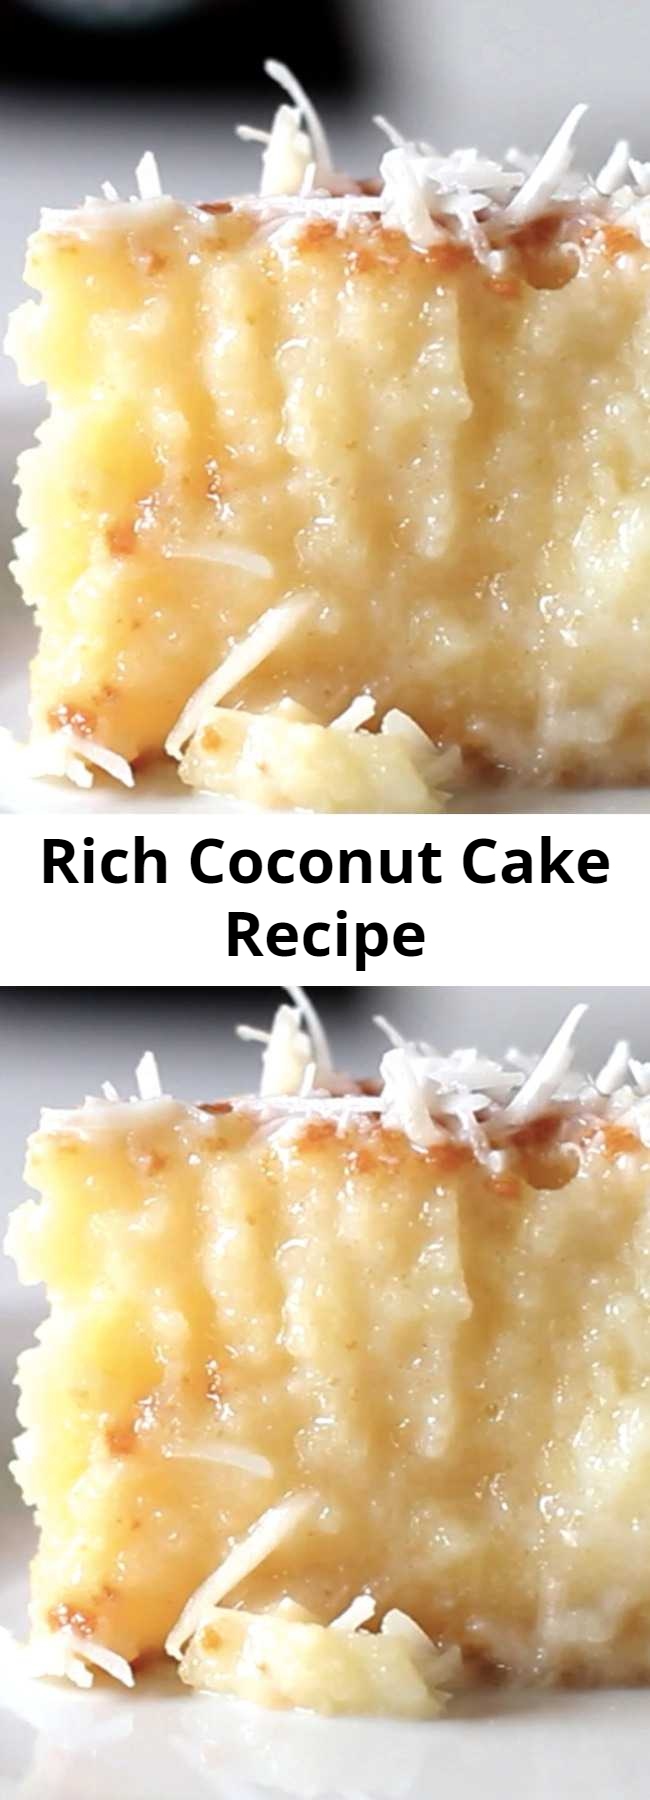 Rich Coconut Cake Recipe - A cake with a rich coconut base and grated coconut topping.